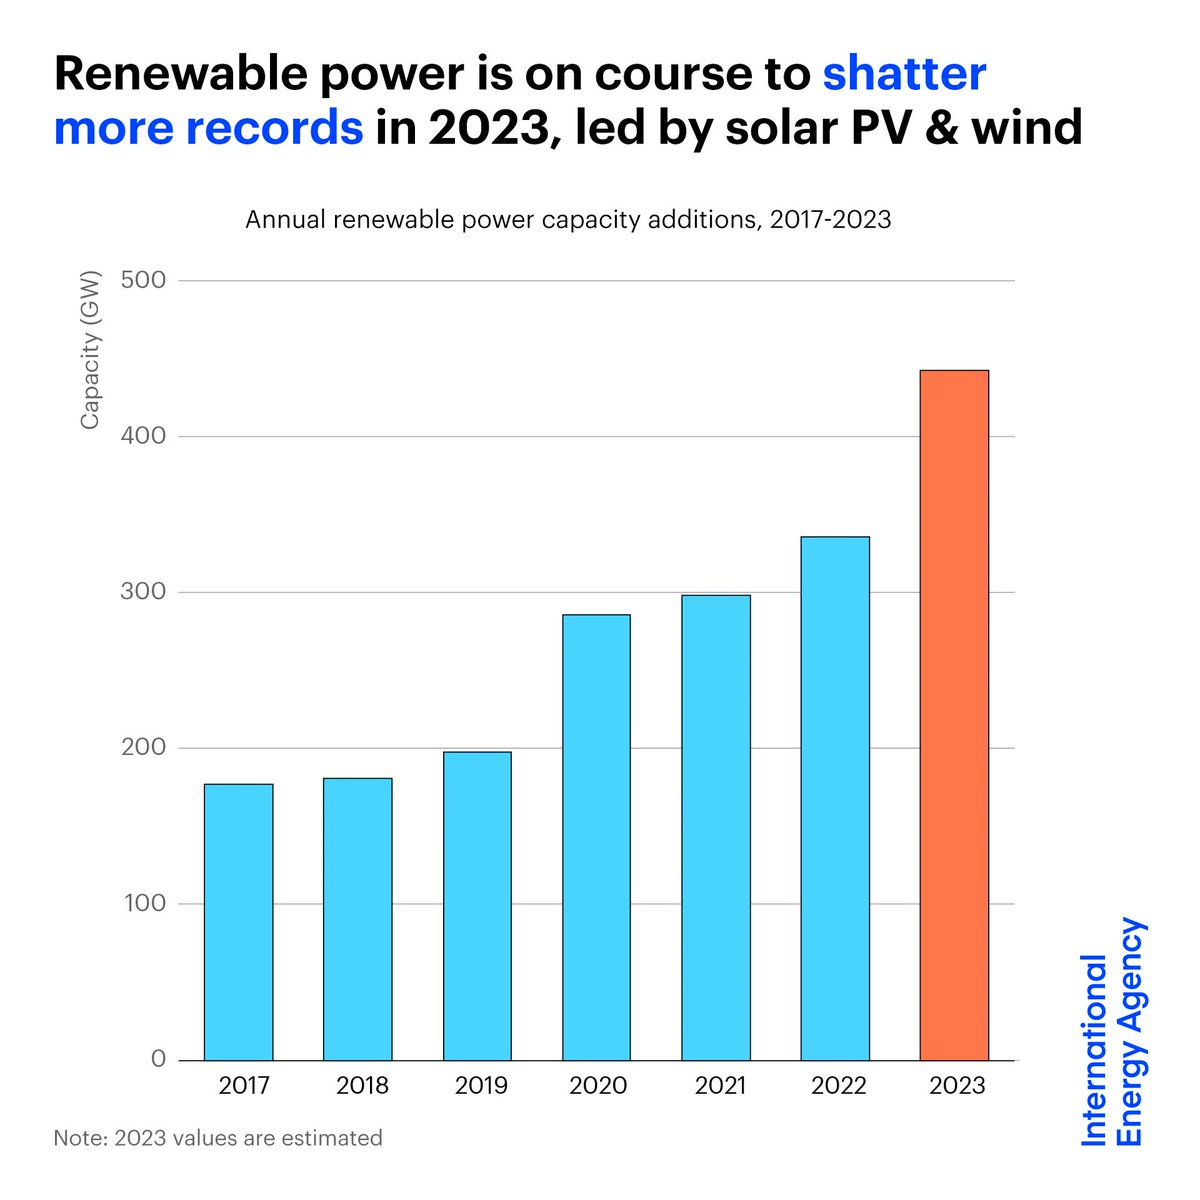 ⚡ HUGE NEWS: A new @IEA report shows that renewable power capacity is expected to increase by a third worldwide. With solar and wind leading the way, this is the biggest annual jump ever.

iea.org/news/renewable…